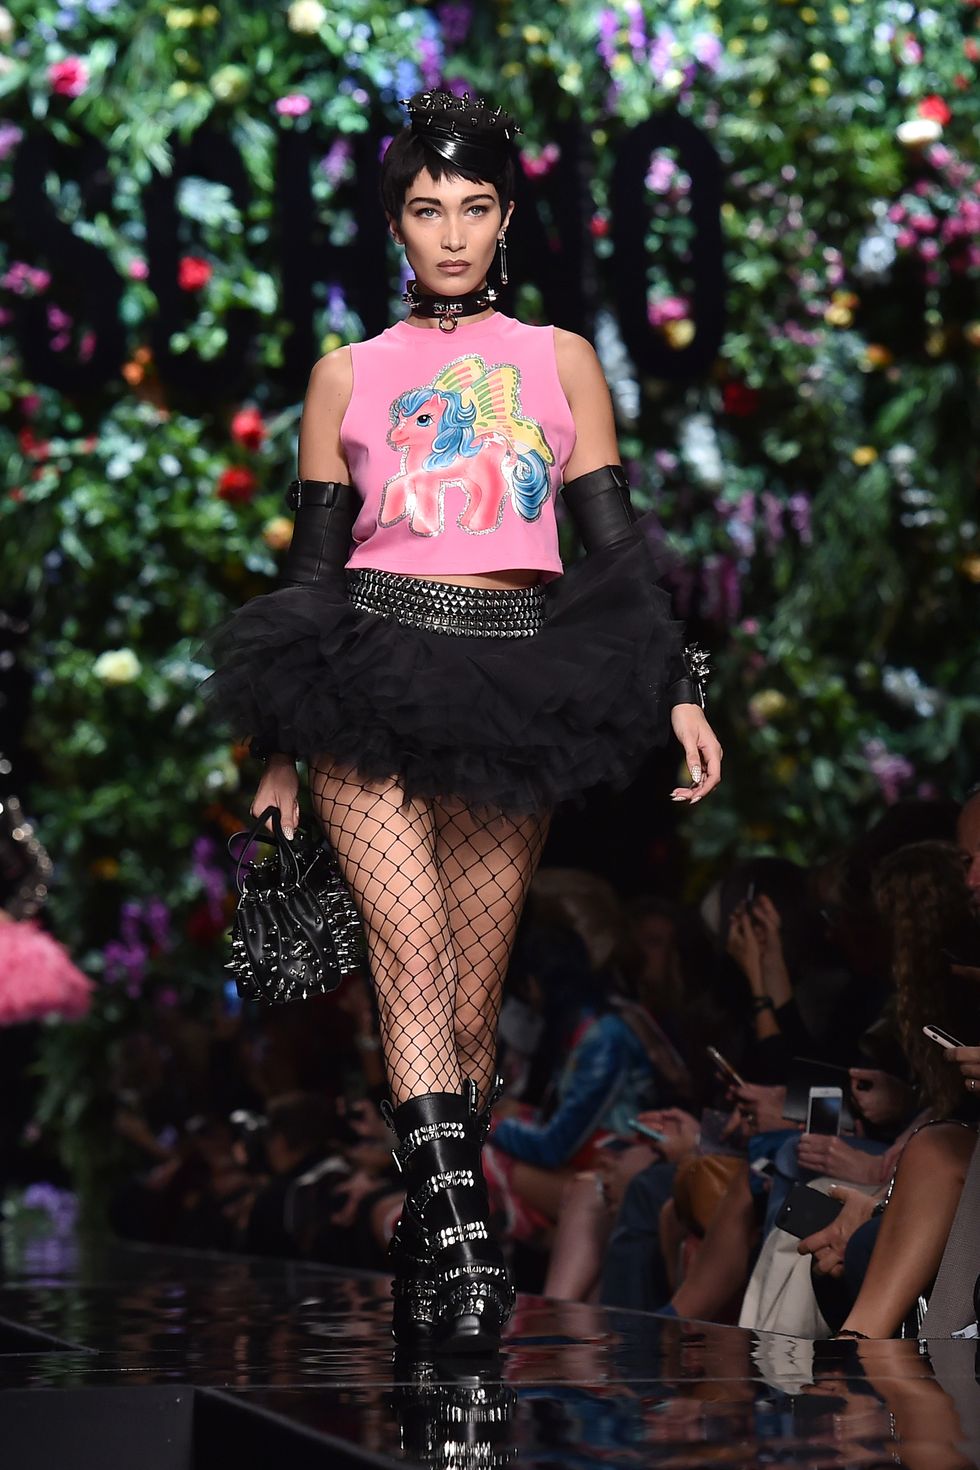 MILAN, ITALY - SEPTEMBER 21:  Bella Hadid walks the runway at the Moschino show during Milan Fashion Week Spring/Summer 2018 on September 21, 2017 in Milan, Italy.  (Photo by Jacopo Raule/Getty Images)